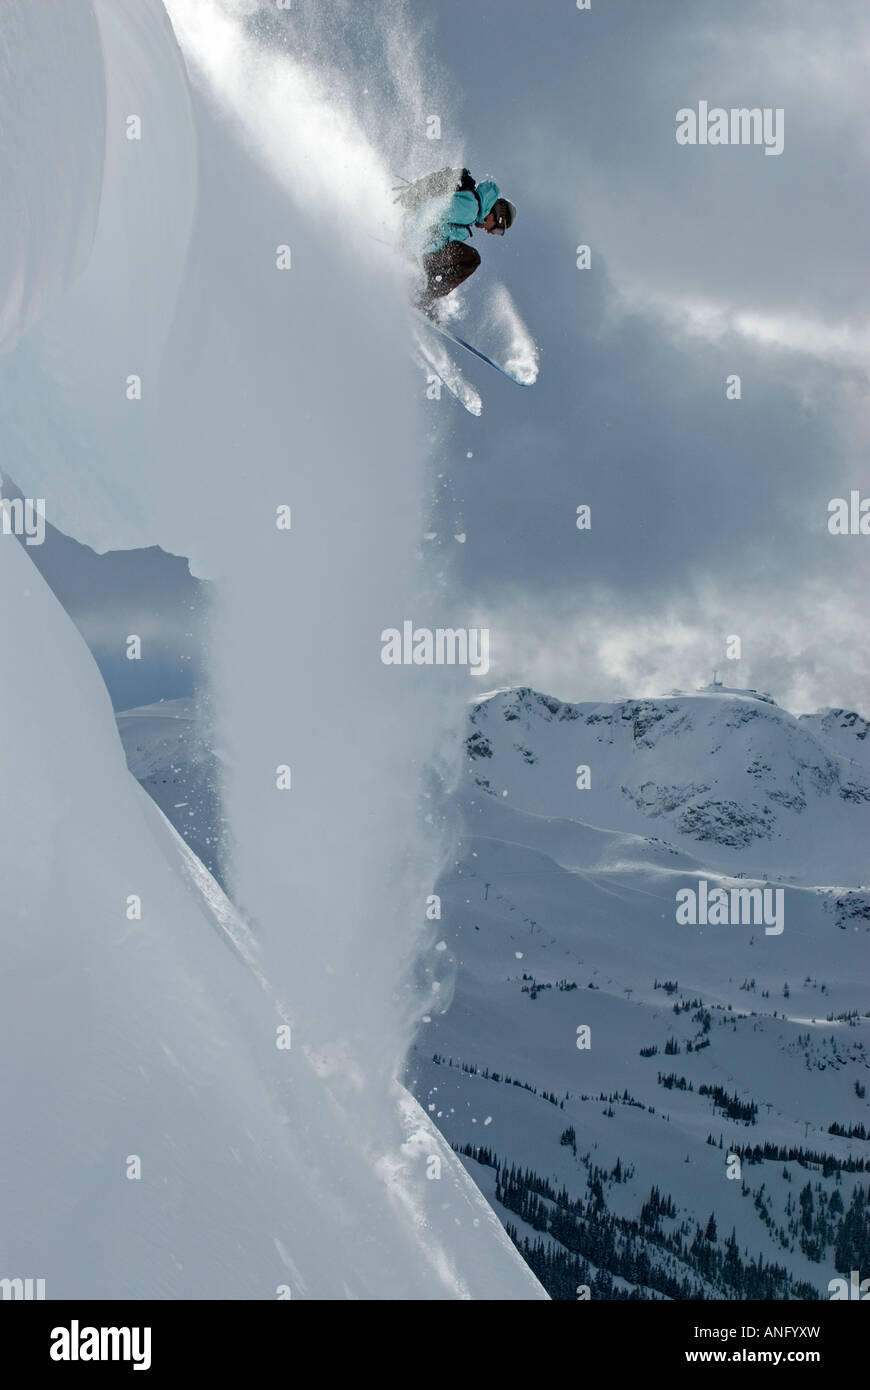 A daring skier takes the plunge off a cornice in the backcountry of Blackcomb Mountain, British Columbia, Canada. Stock Photo